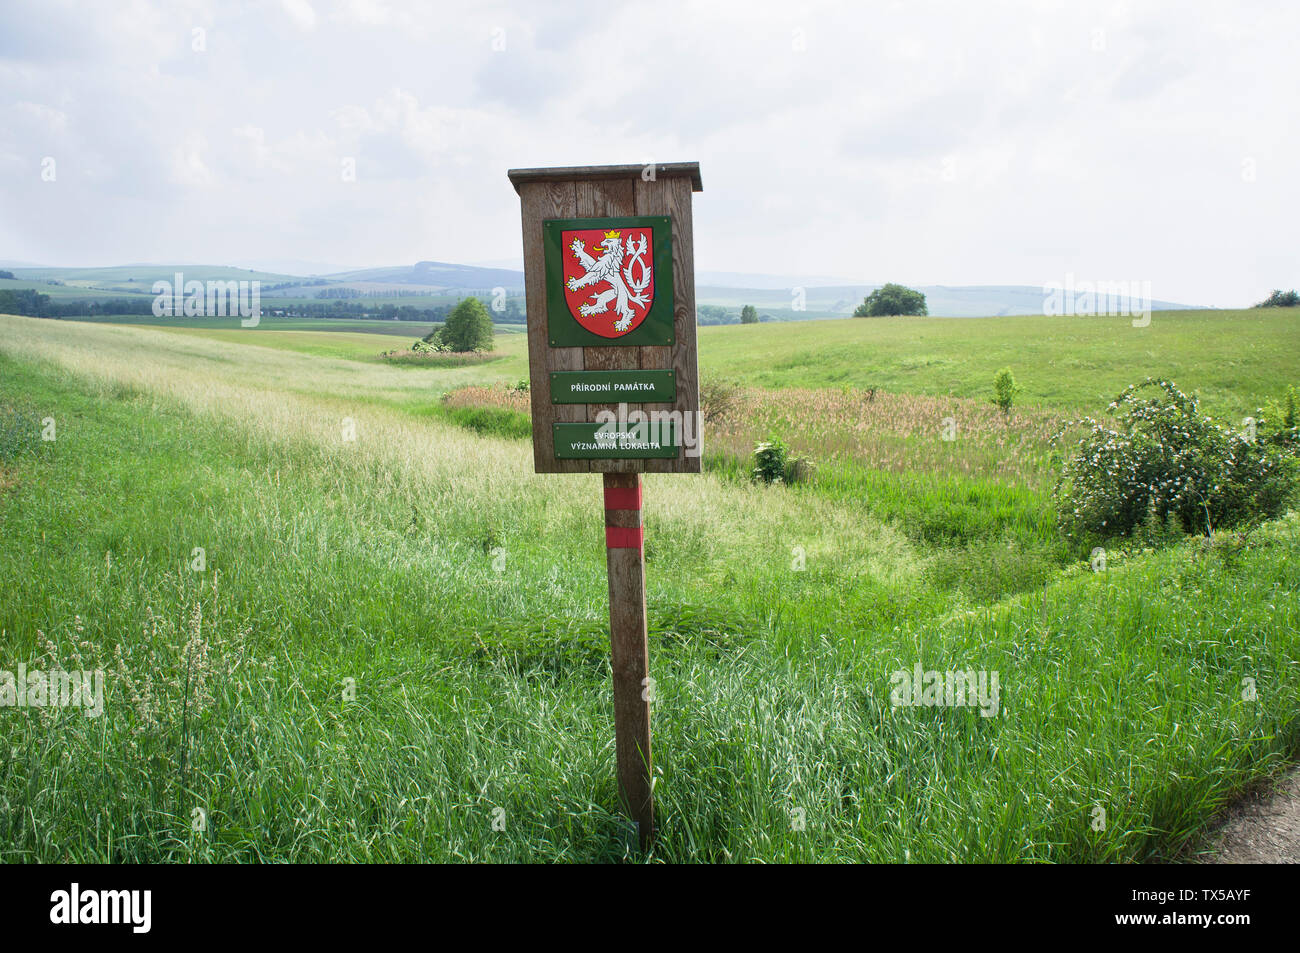 A Special Area of Conservation (SAC, defined in the European Union's Habitats Directive) sign, Natura 2000 Nature Reserve Miliovy louky, Blatnicka, So Stock Photo